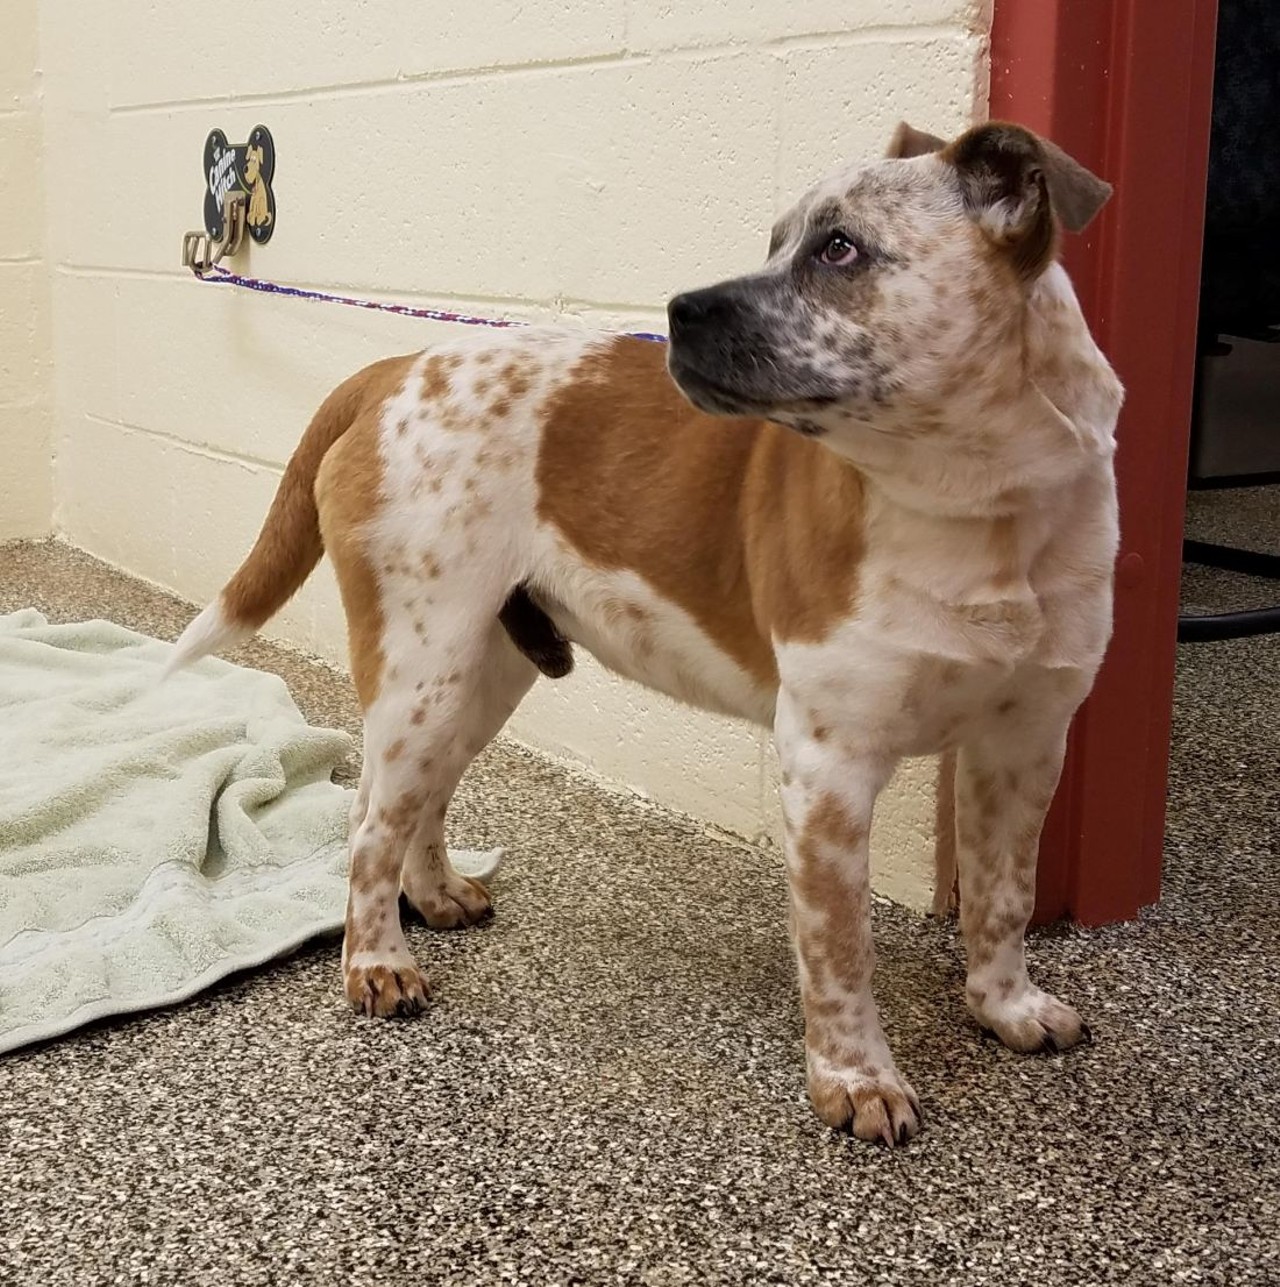 NAME: Tater Tot
GENDER: Male
BREED: Australian Cattle Dog-Blue Heeler-English Bulldog mix
AGE: 1 years, 6 months
WEIGHT: 32 pounds
SPECIAL CONSIDERATIONS: None
REASON I CAME TO MHS: Agency transfer
LOCATION: Berman Center for Animal Care in Westland
ID NUMBER: 863782